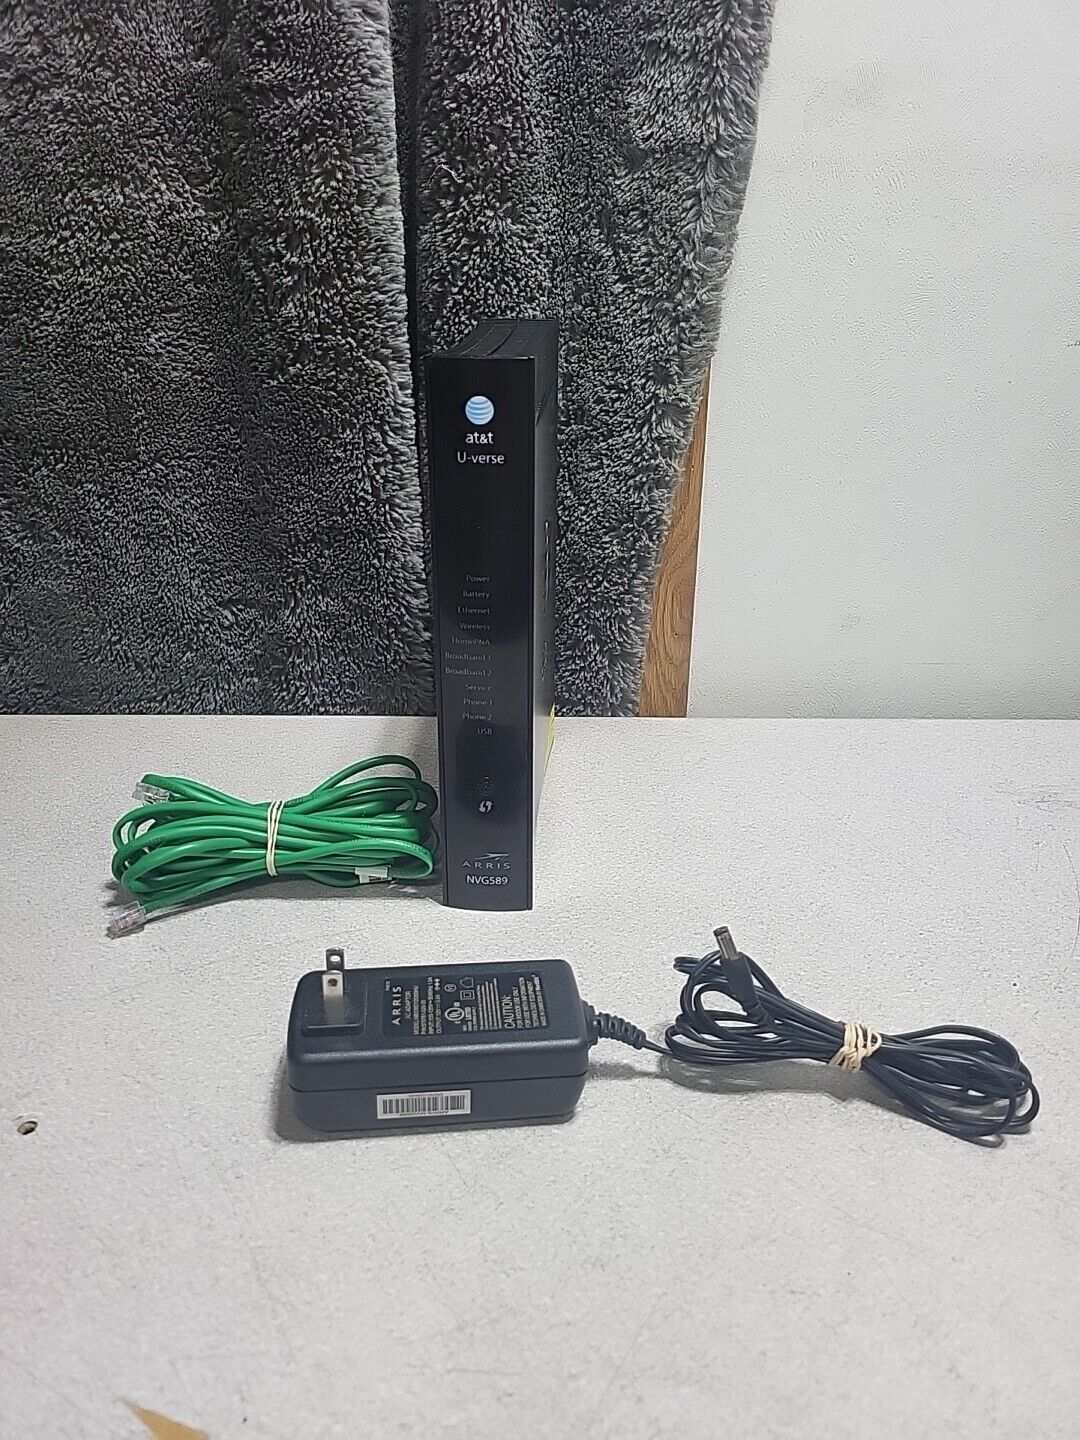 AT&T Arris U-Verse NVG589 Wi-Fi Modem/Router + Power Cord Ethernet Cord